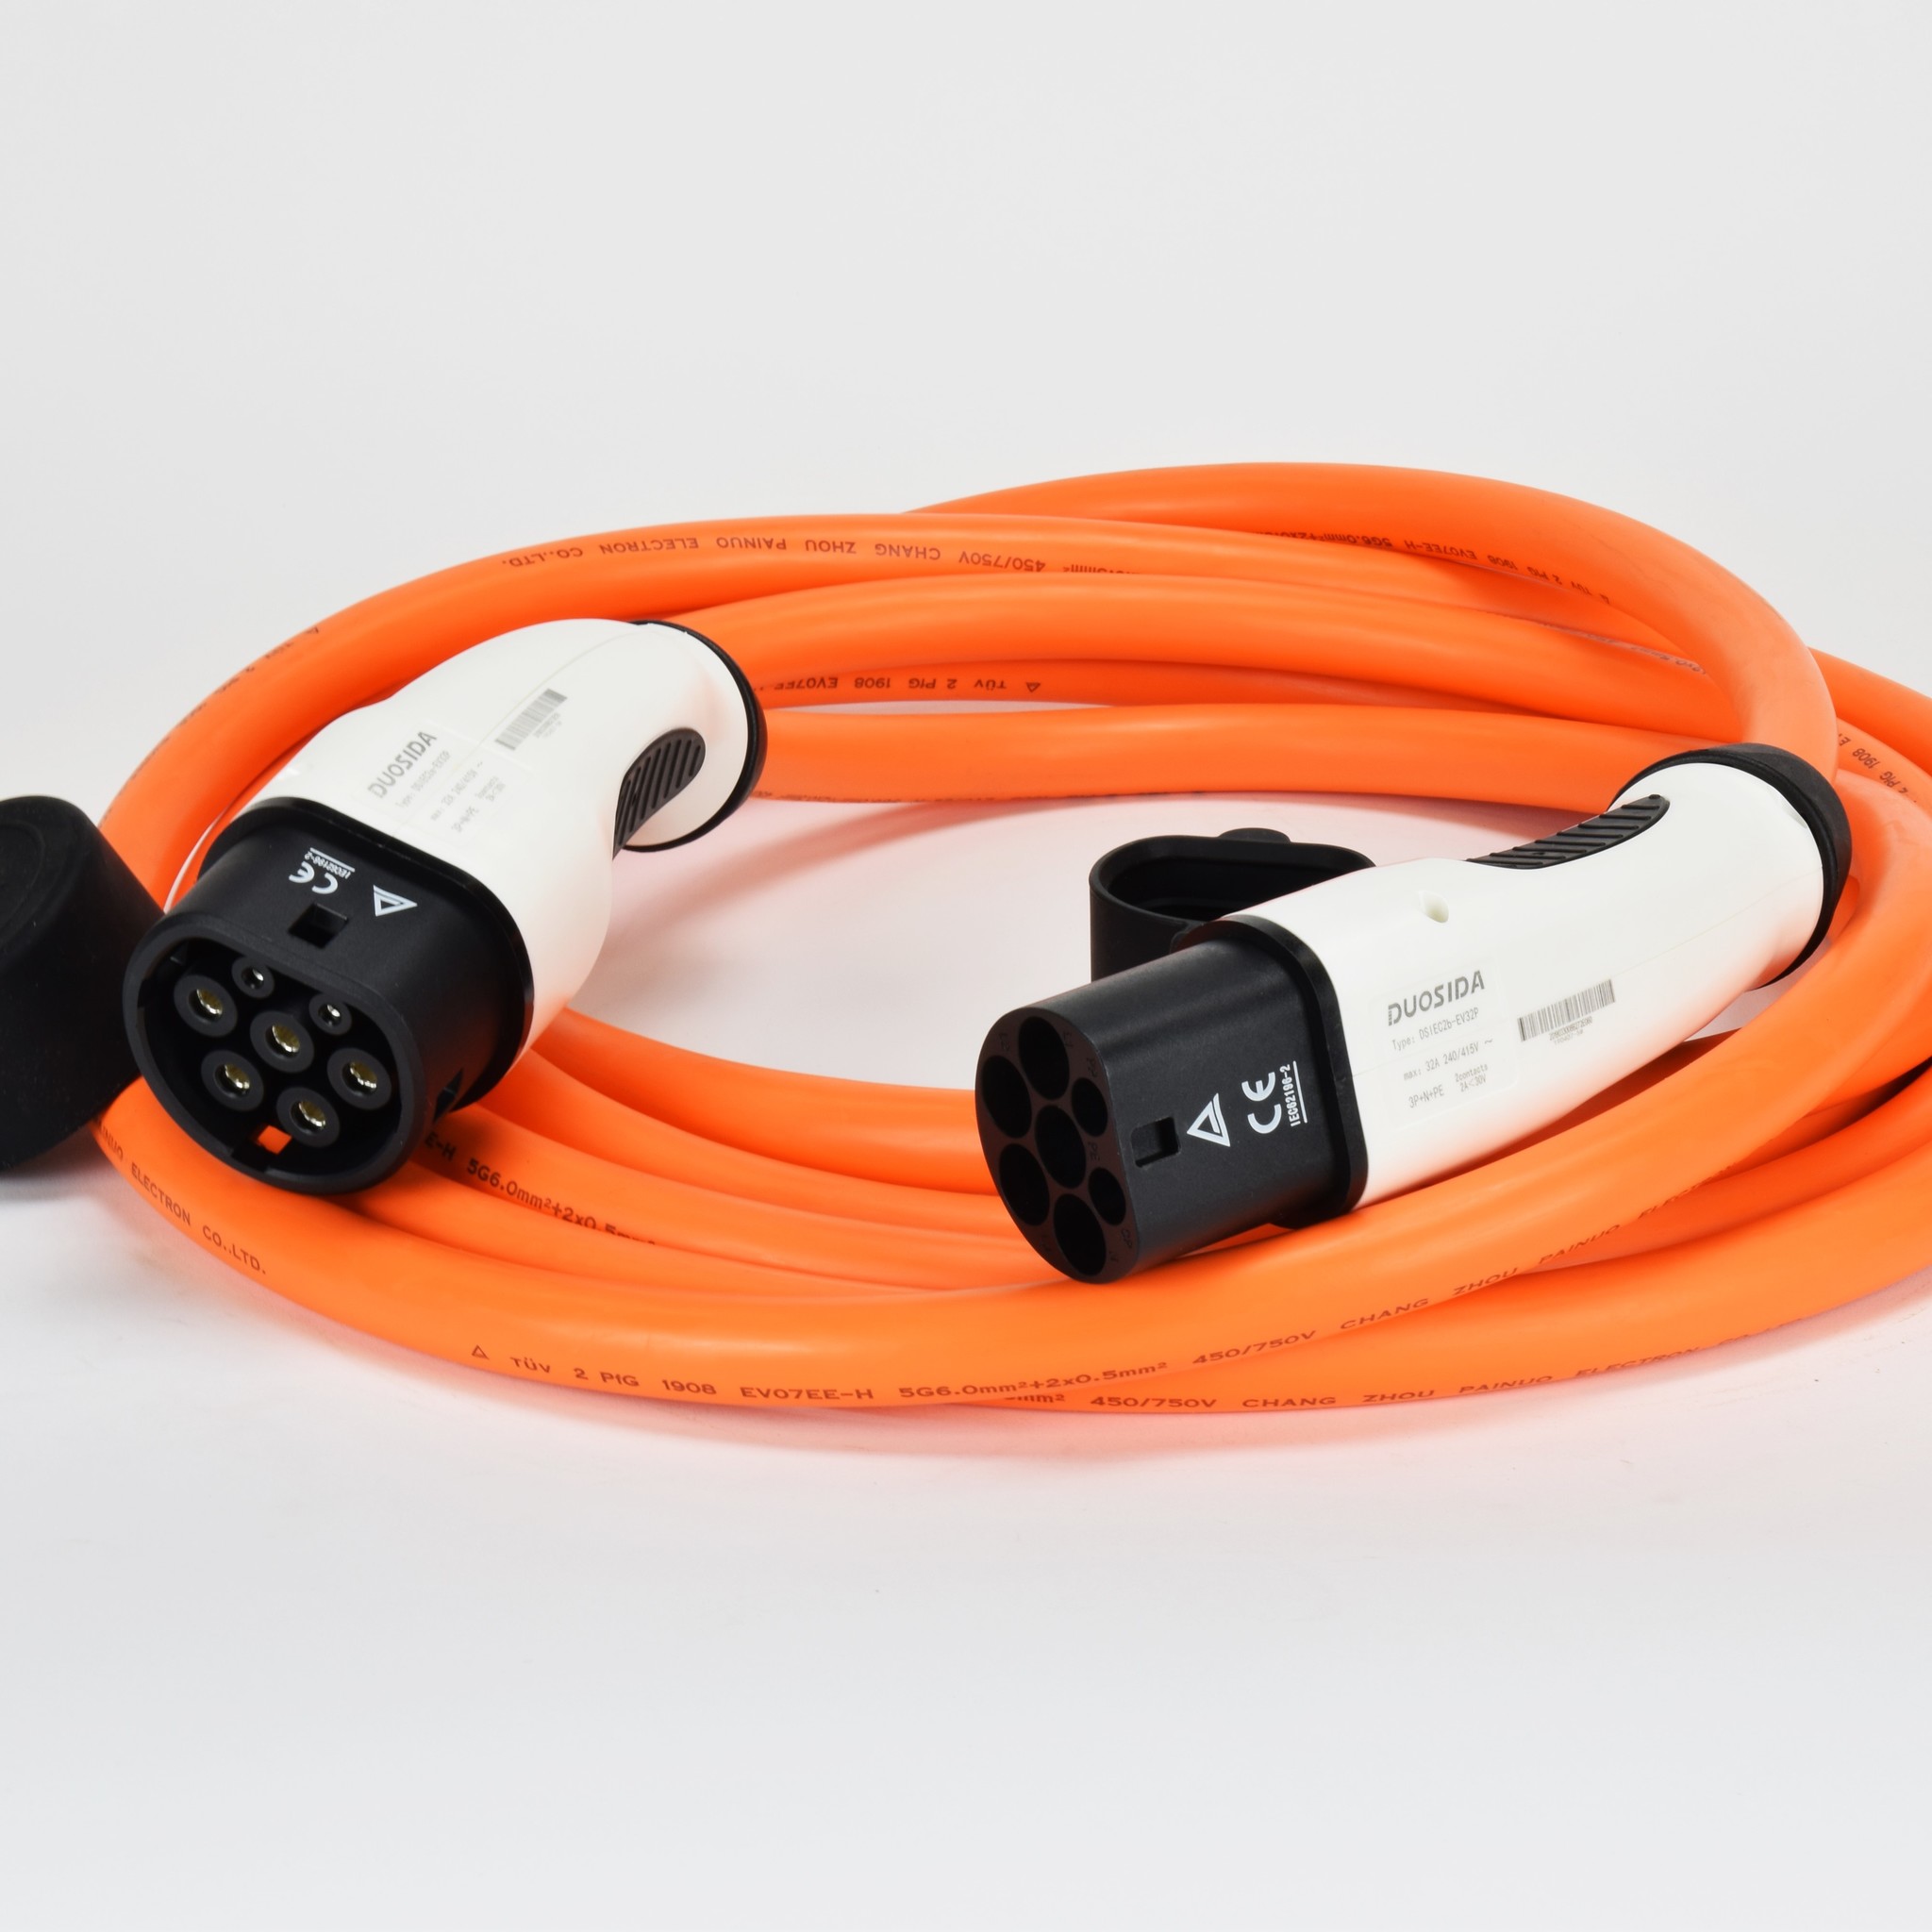 Ideal Wholesale charging cable type 2 renault zoe For Your